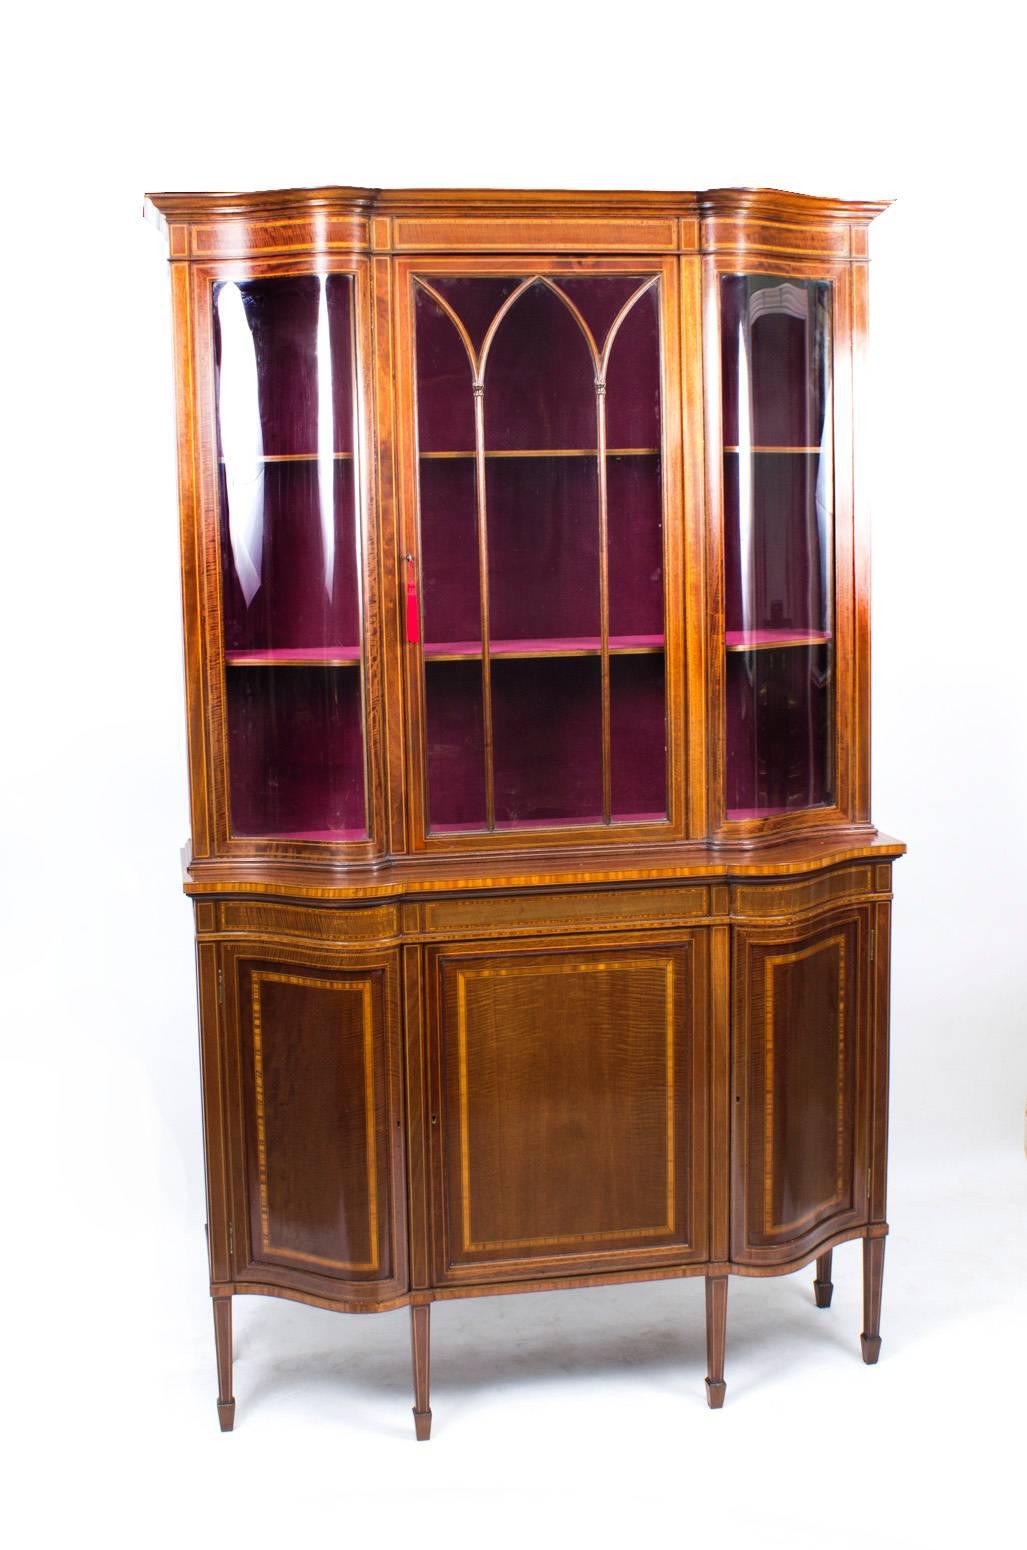 Antique Edwardian Serpentine Inlaid Display Cabinet Early 20th Century 4